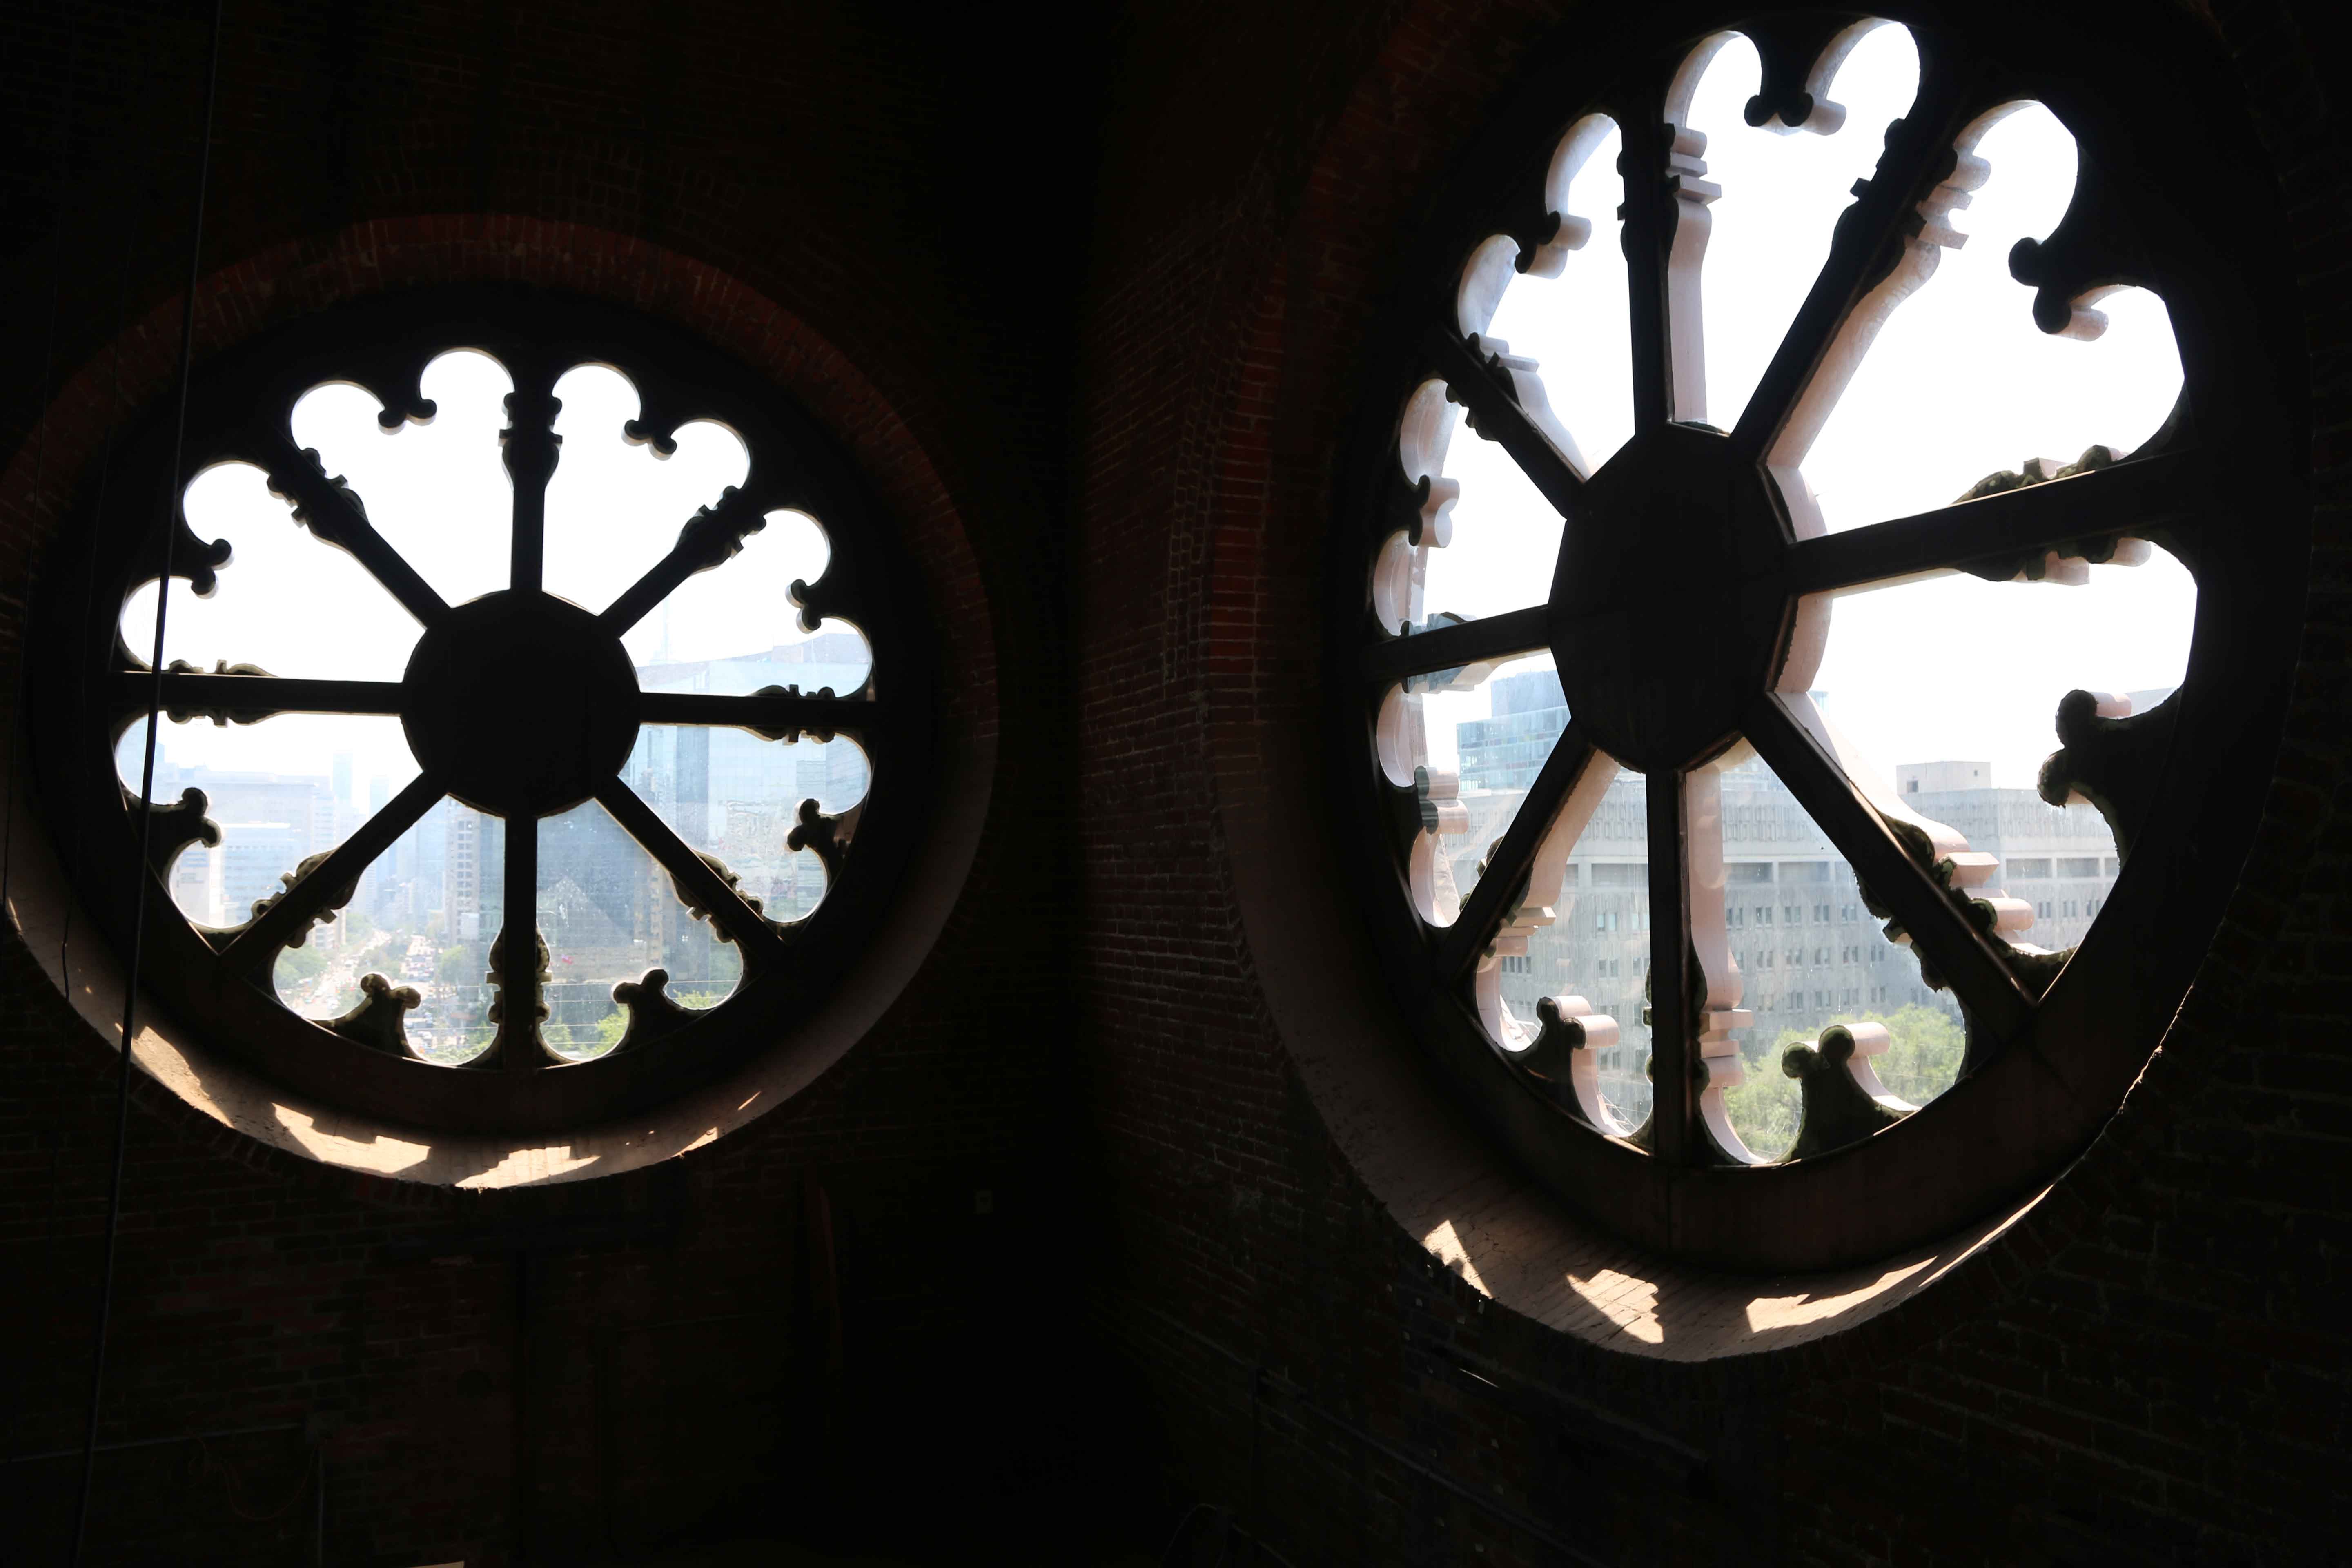 View of rosette windows from the inside of the Legislative building.